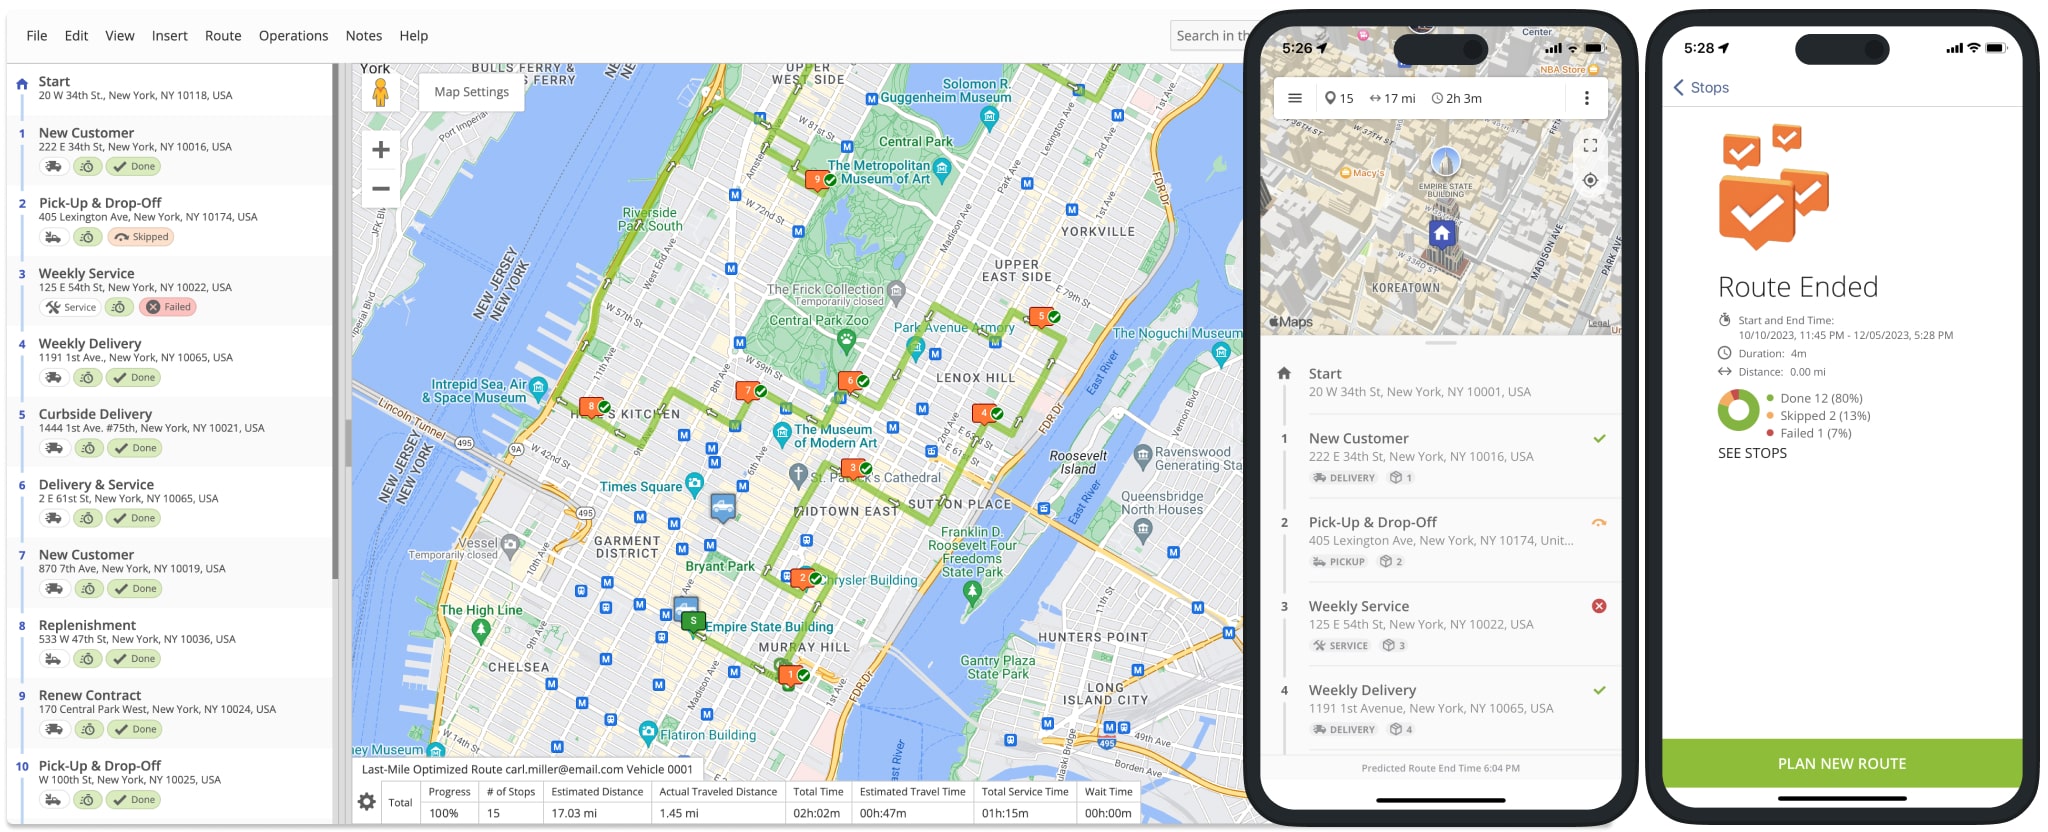 Synchronizing route data in real-time between Route4Me's mobile driver route planner app and Web Platform.